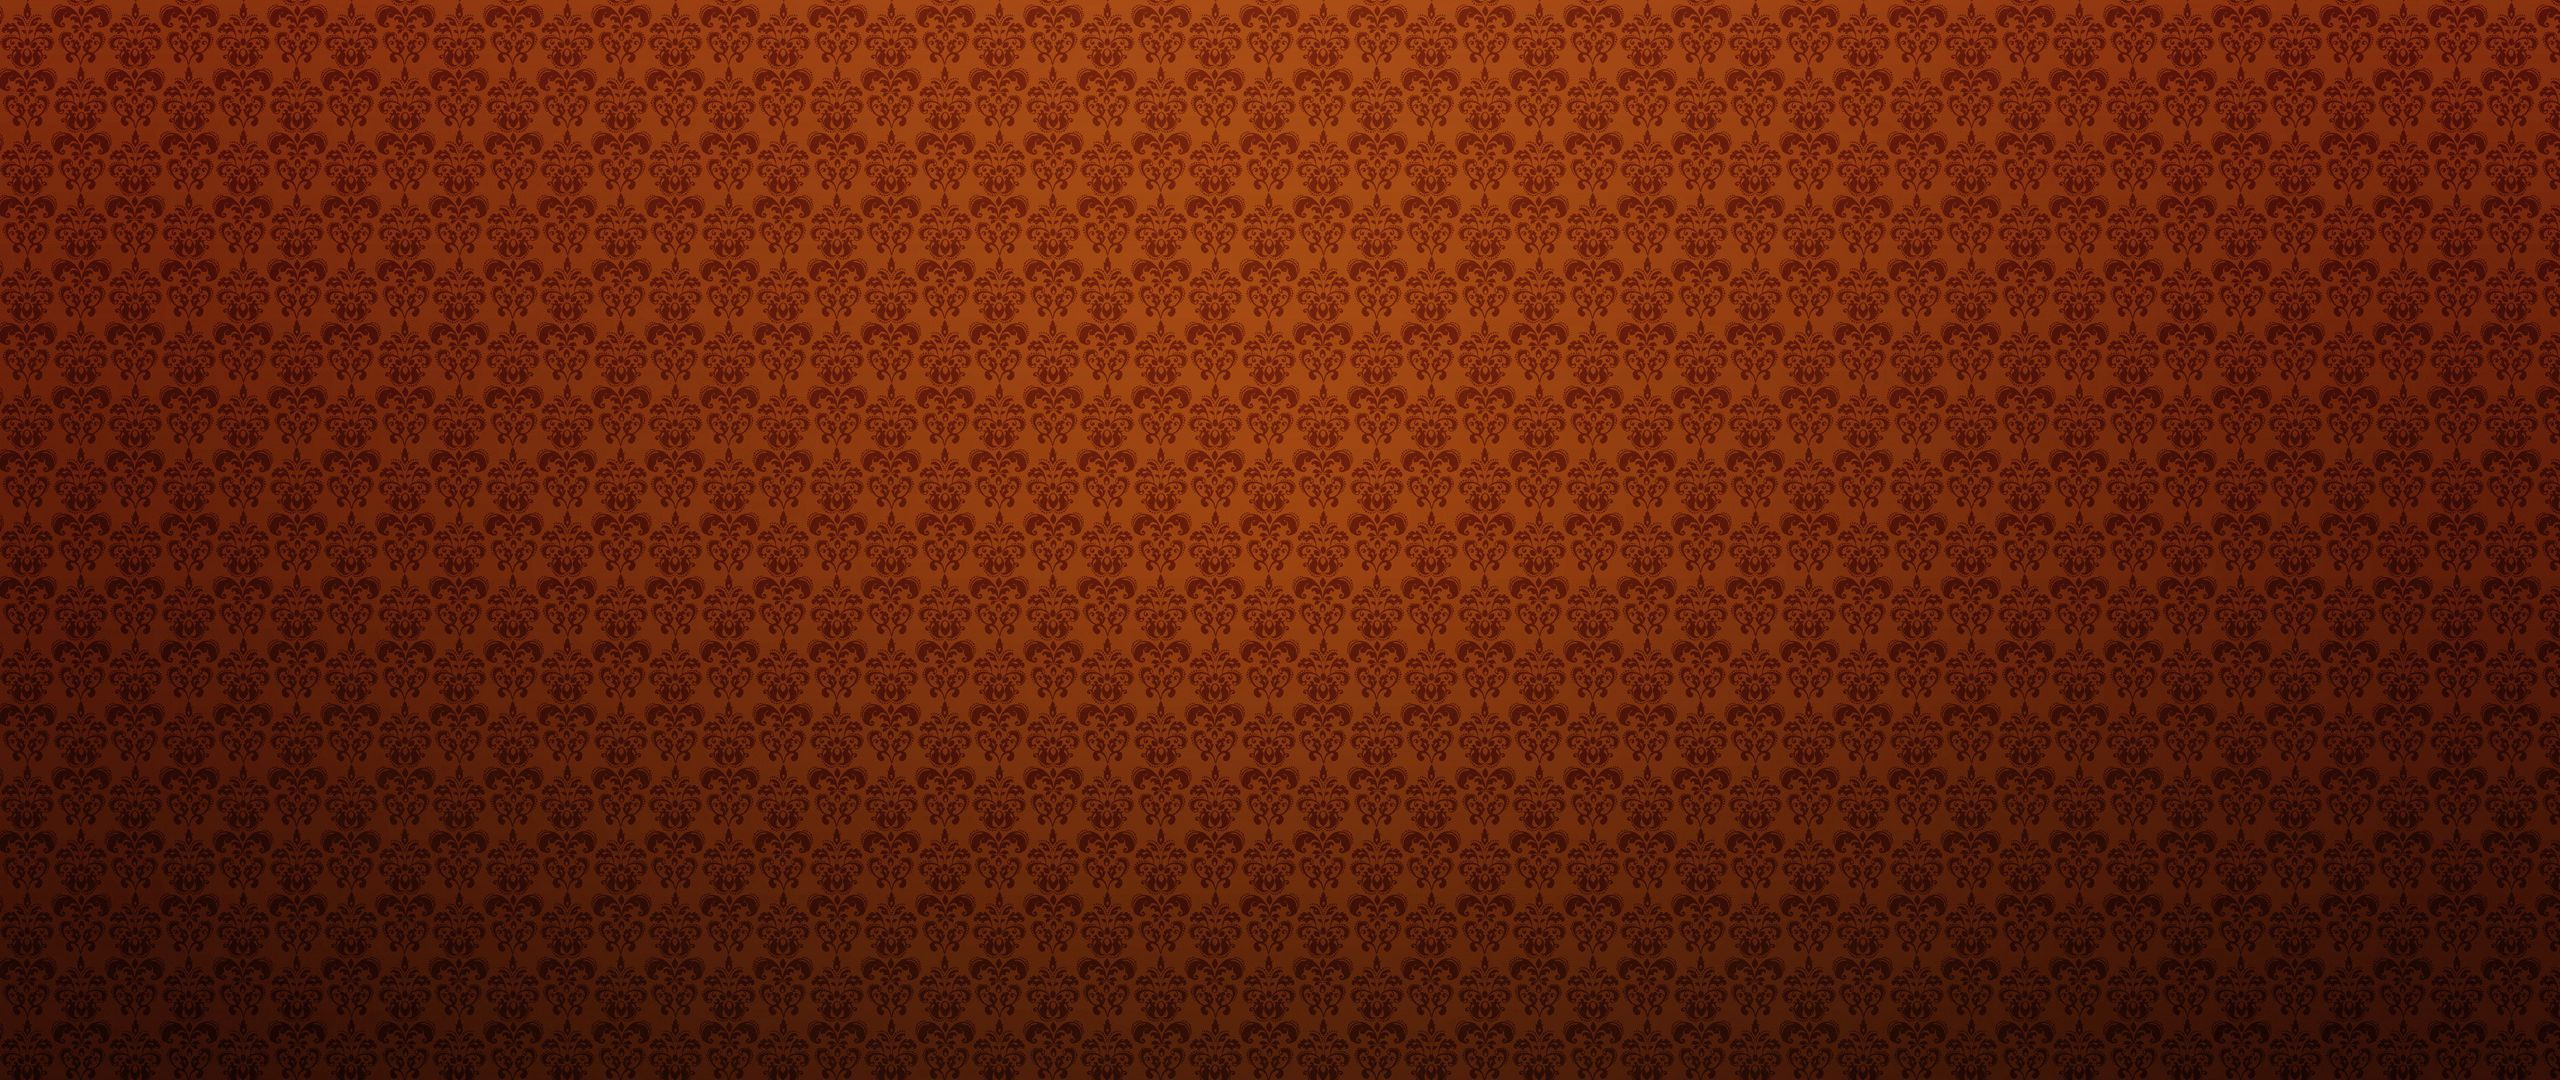 Download wallpaper 2560x1080 patterns, light, colorful, texture, background dual wide 1080p HD background